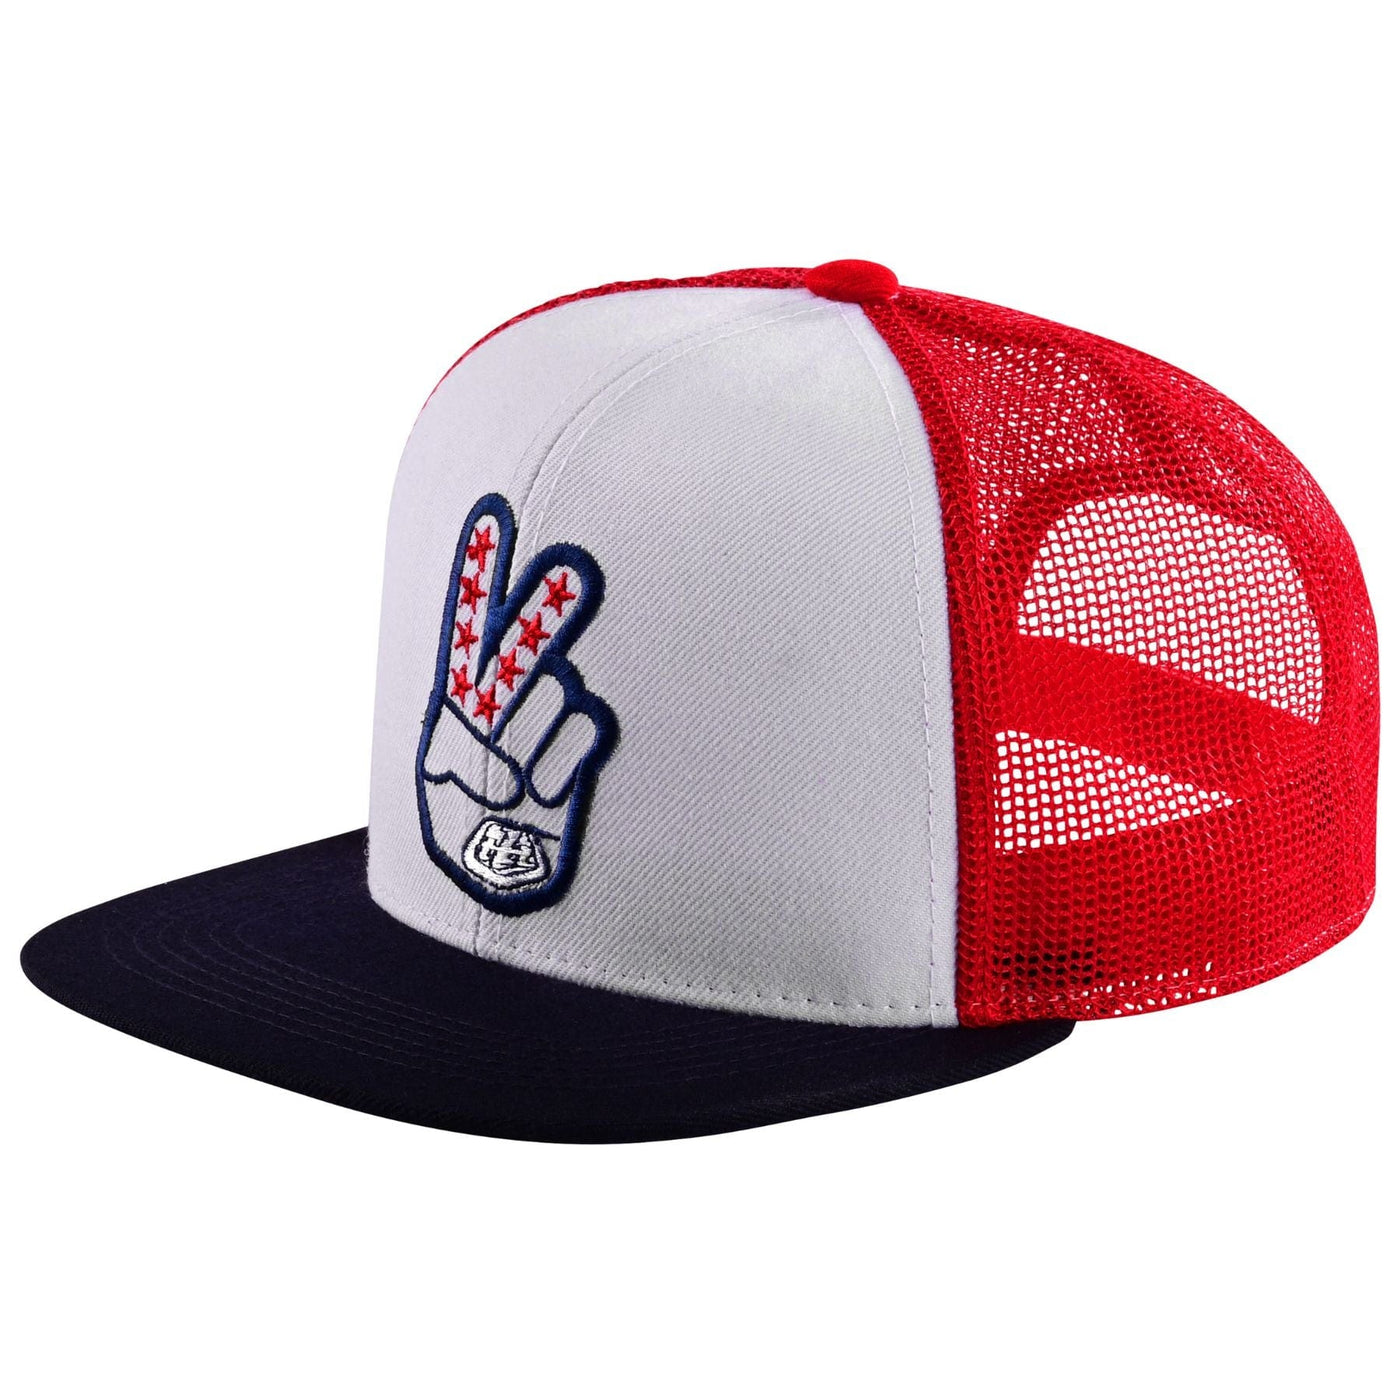 Troy Lee Designs Trucker Peace Out Snapback Hat - Red/White